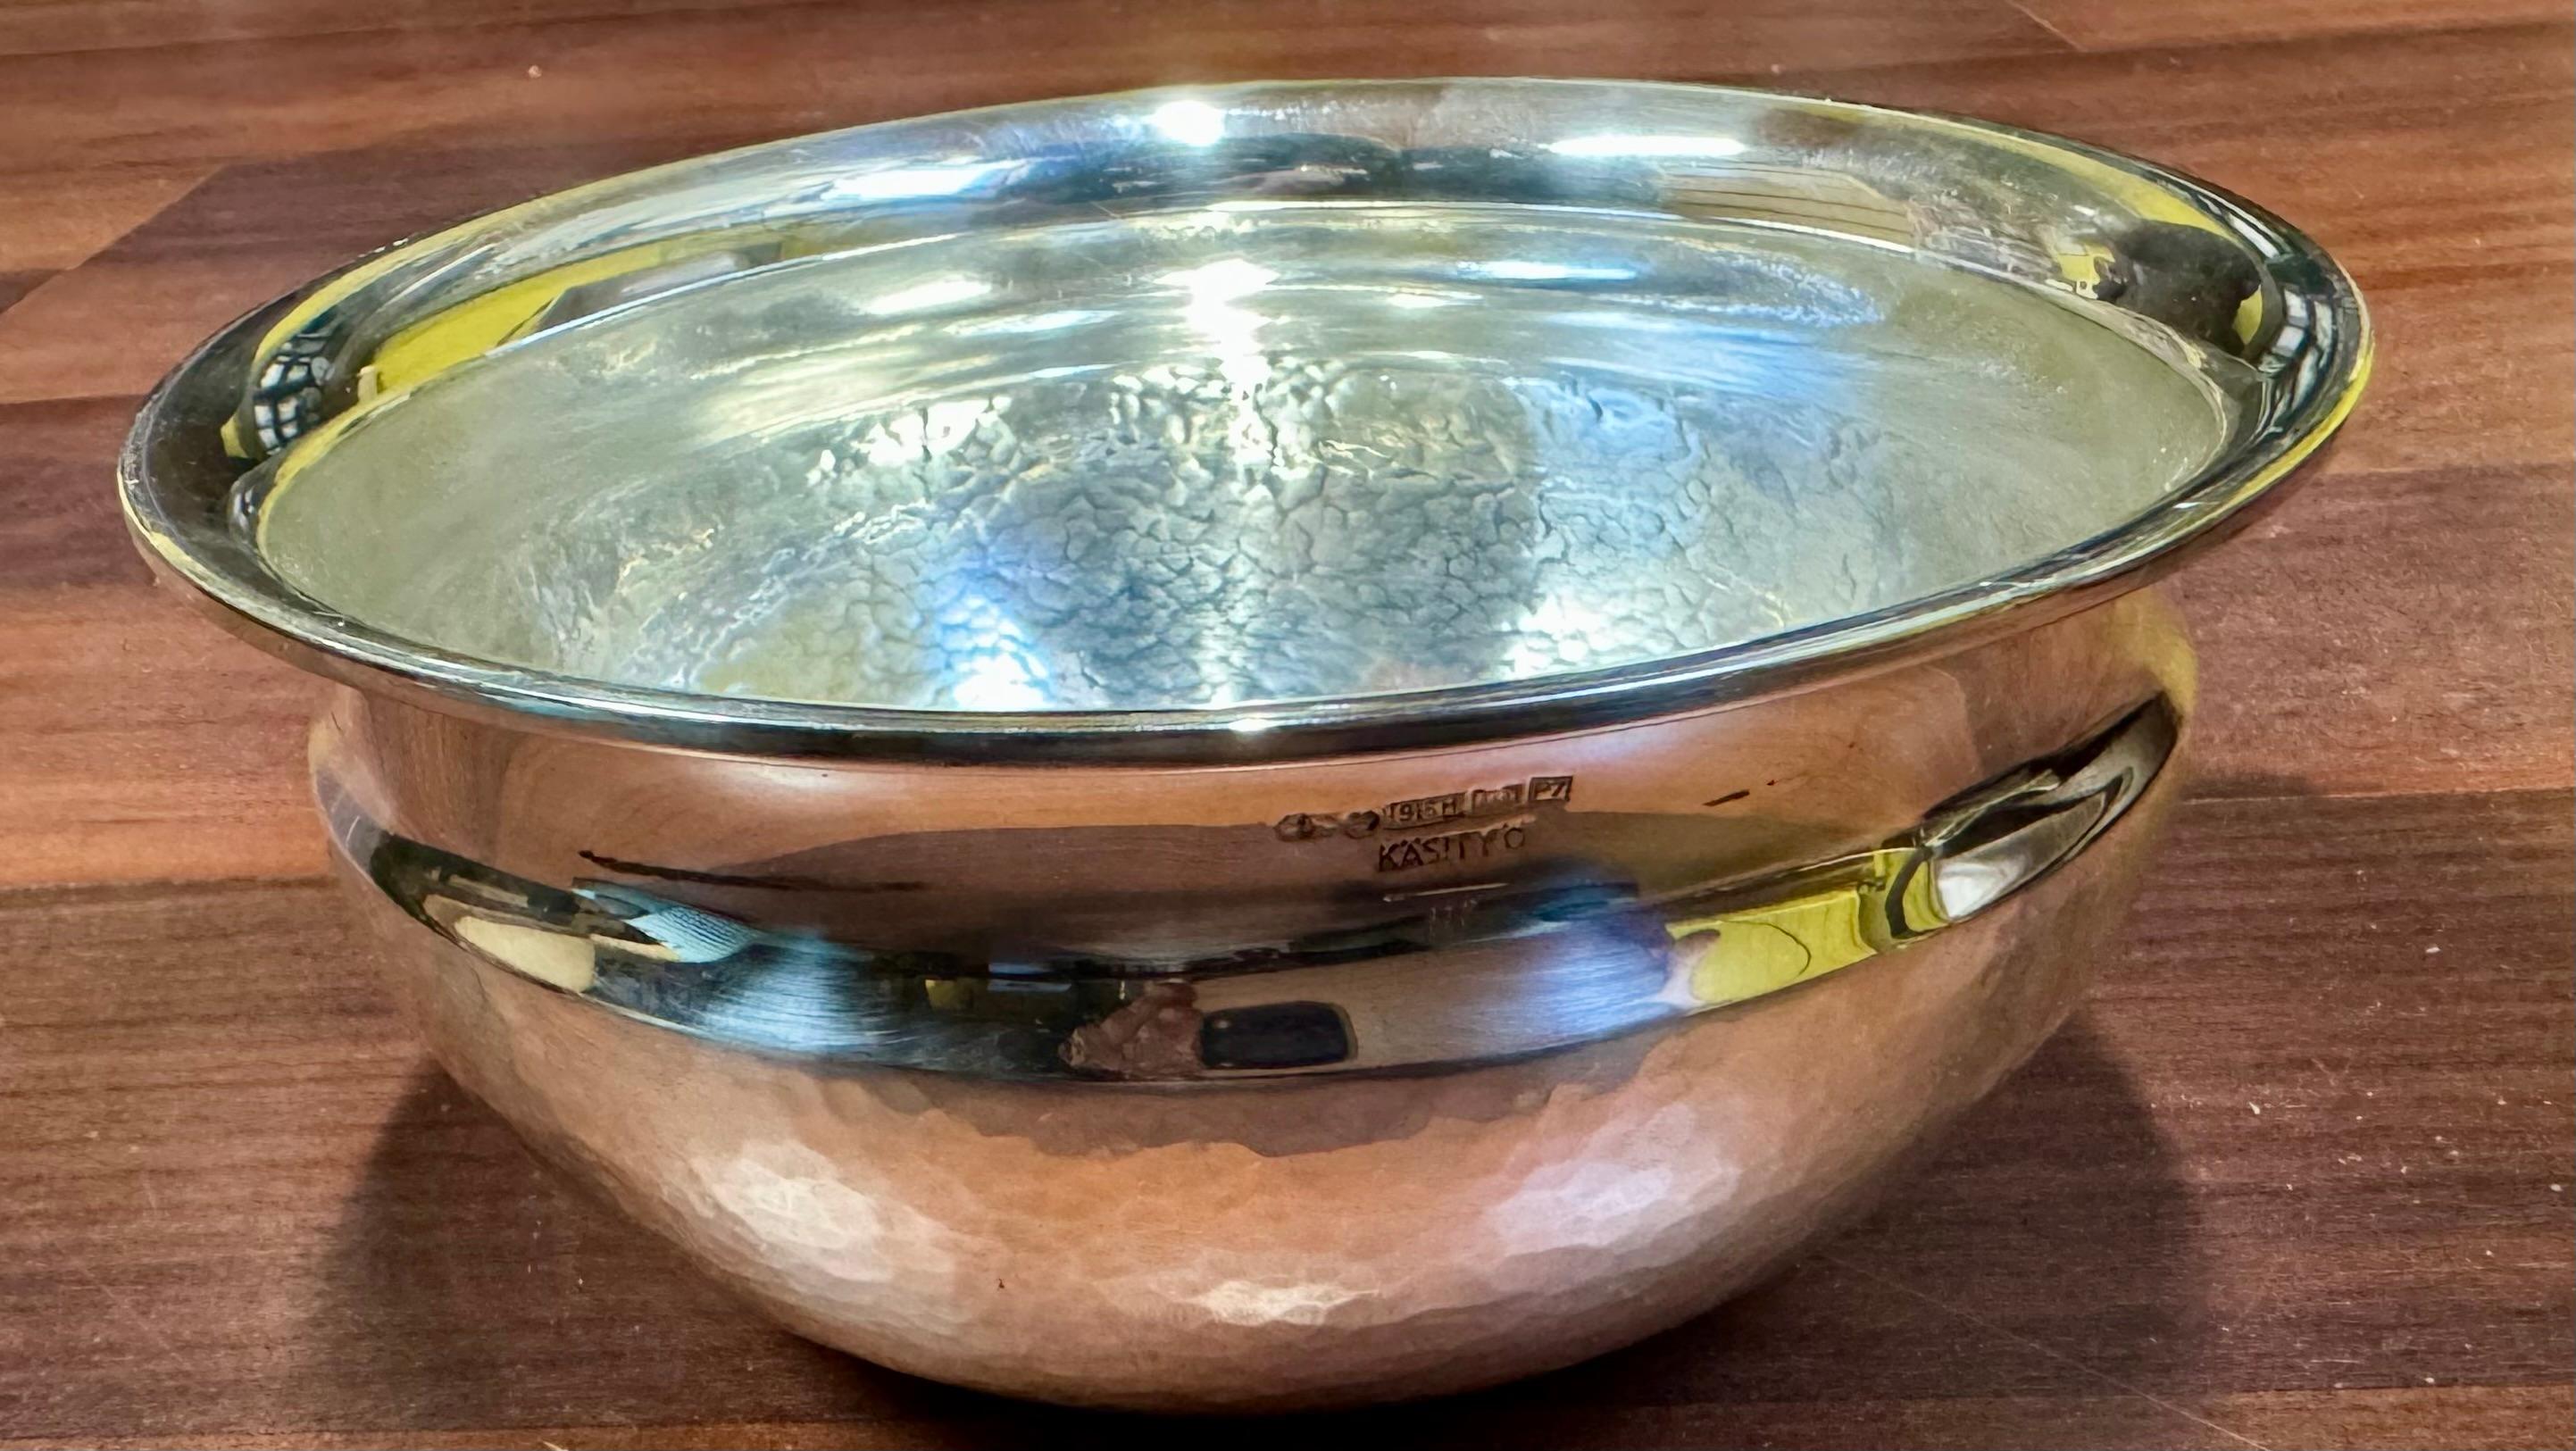 Rare and beautiful handmade, hammered .916H Silver bowl by Tapio Wirkkala.
This was made to order. Not in serial production.
Diameter 15 cm, height 7 cm.
By Kultakeskus Hämeenlinna Finland
Weight: 363g
Marked KÄSITYÖ (handmade) and with designer's